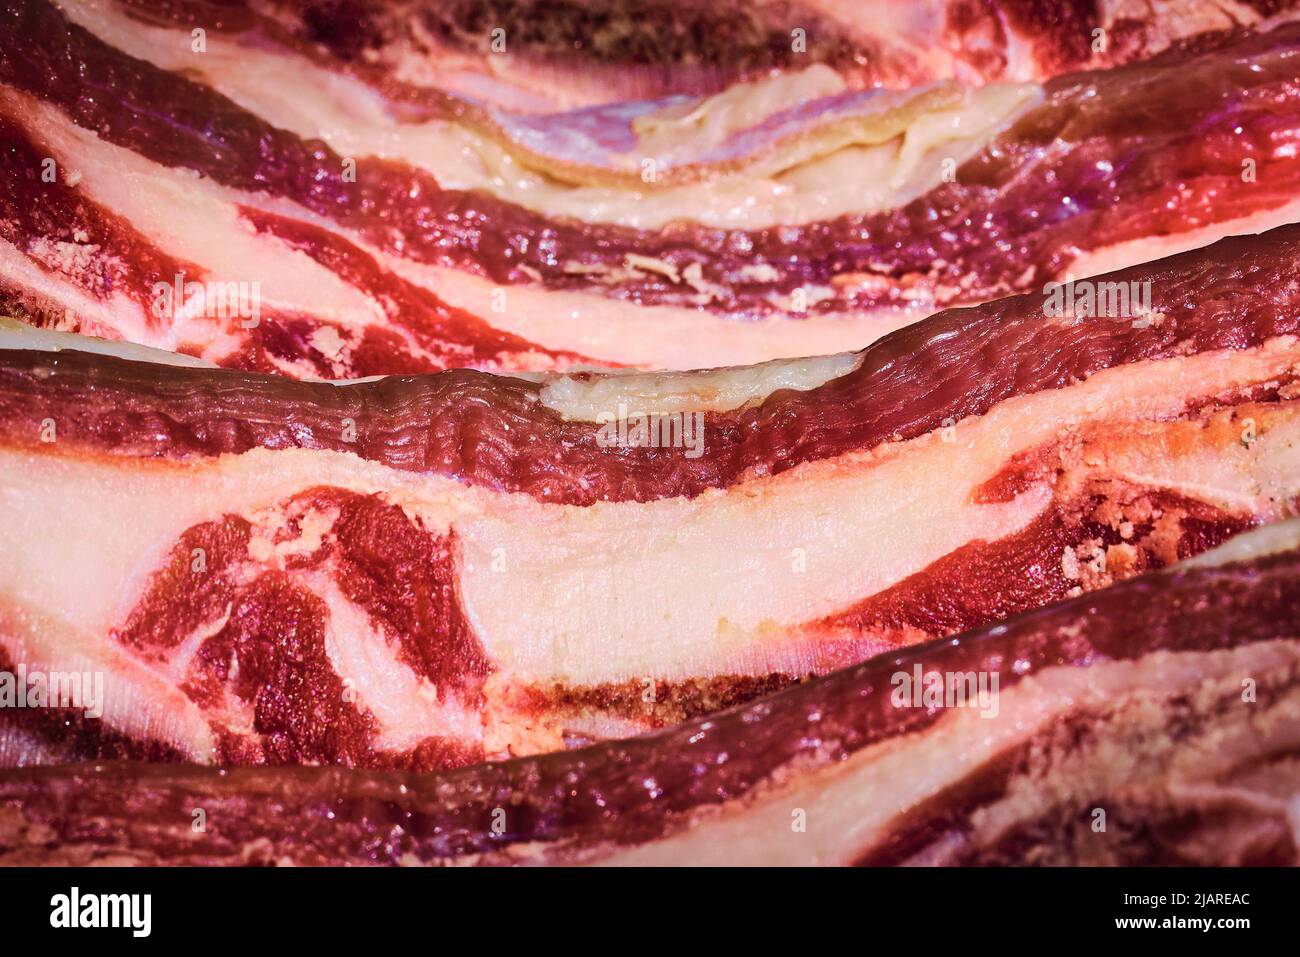 Beef rib meat prepared for grilling on the barbecue Stock Photo